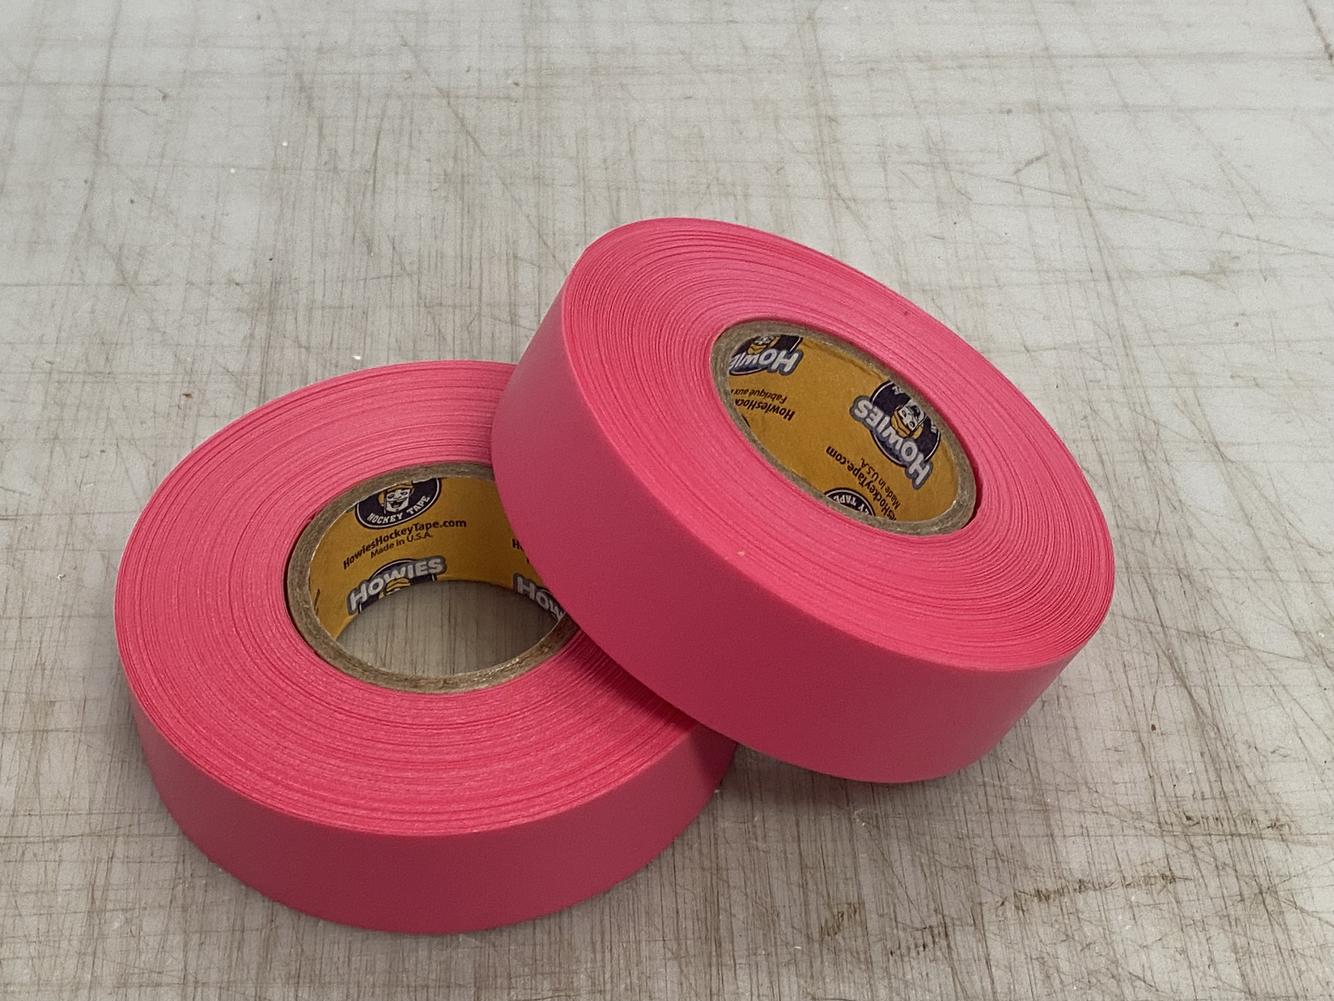 Camouflage 2 Pack of HOWIE'S Hockey Stick Grip Tape 1"x 82' Pink Camo 